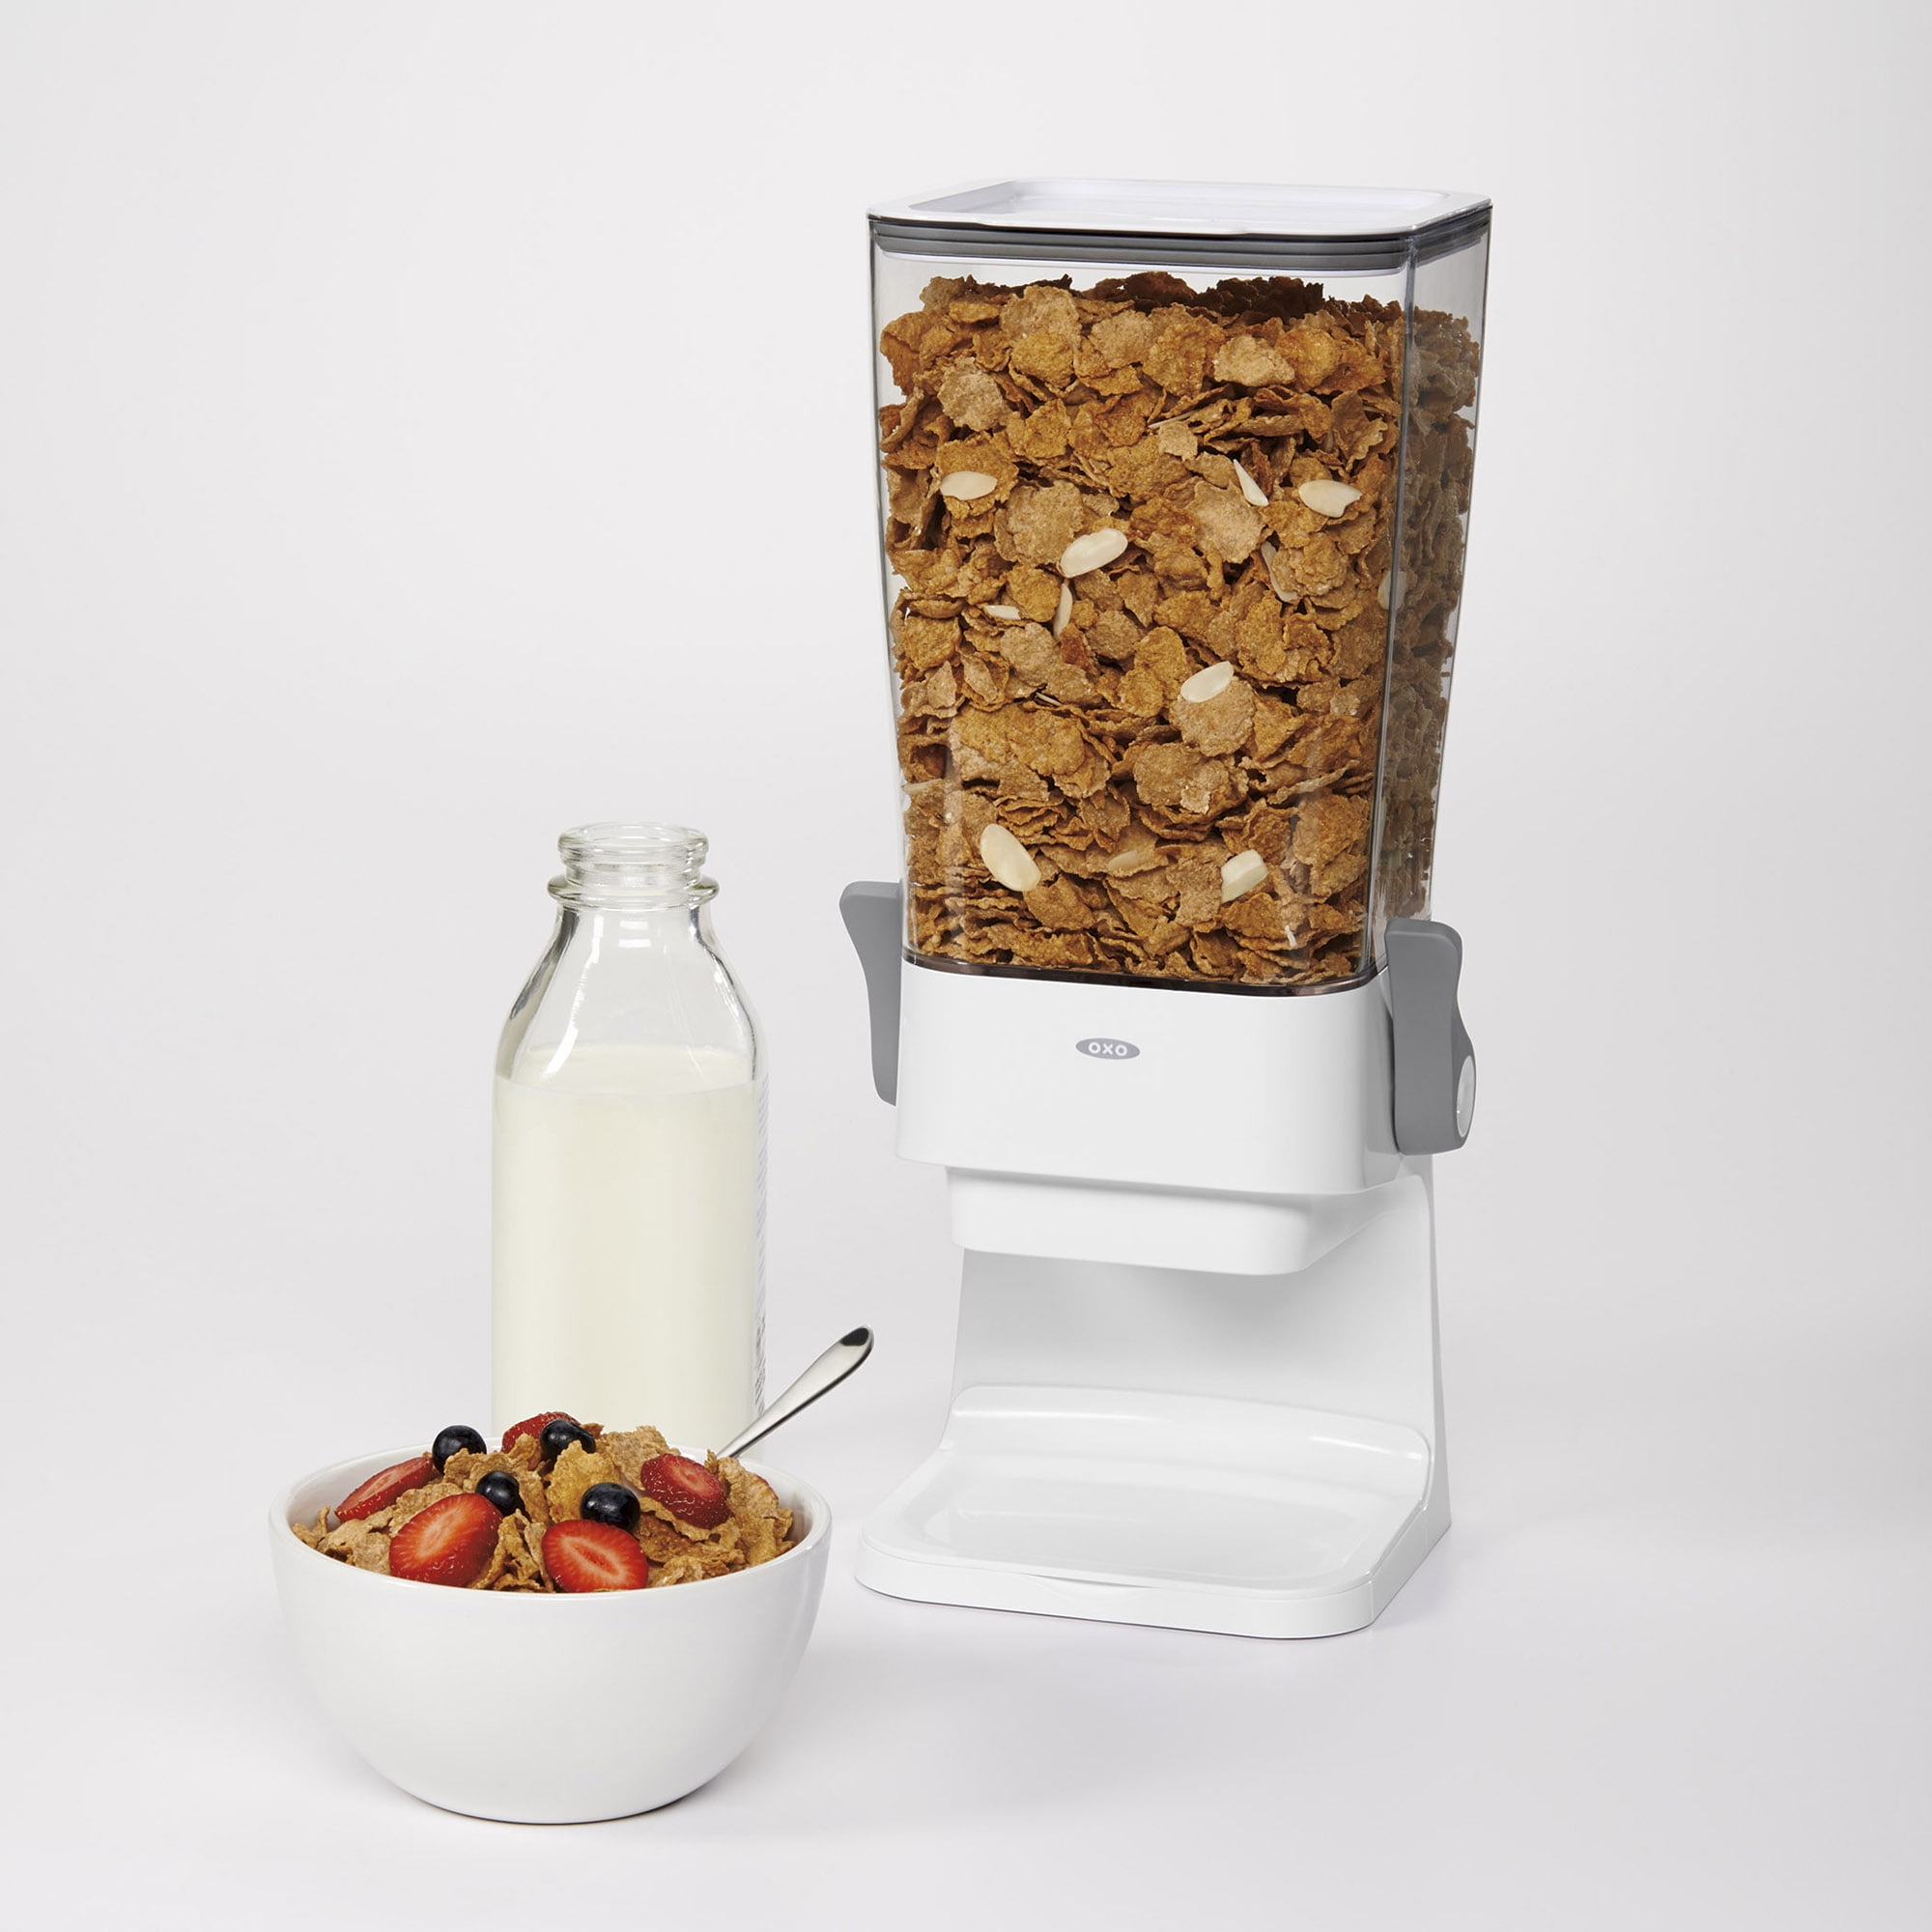 Conworld Cereal Dispenser Countertop, Cereal Dispenser for Pantry, Big Dry  Food Cereal Dispenser, Not Easy to Crush Food, Can Hold Cereal, Candy,  Snack, (White, 5.5 Qt)